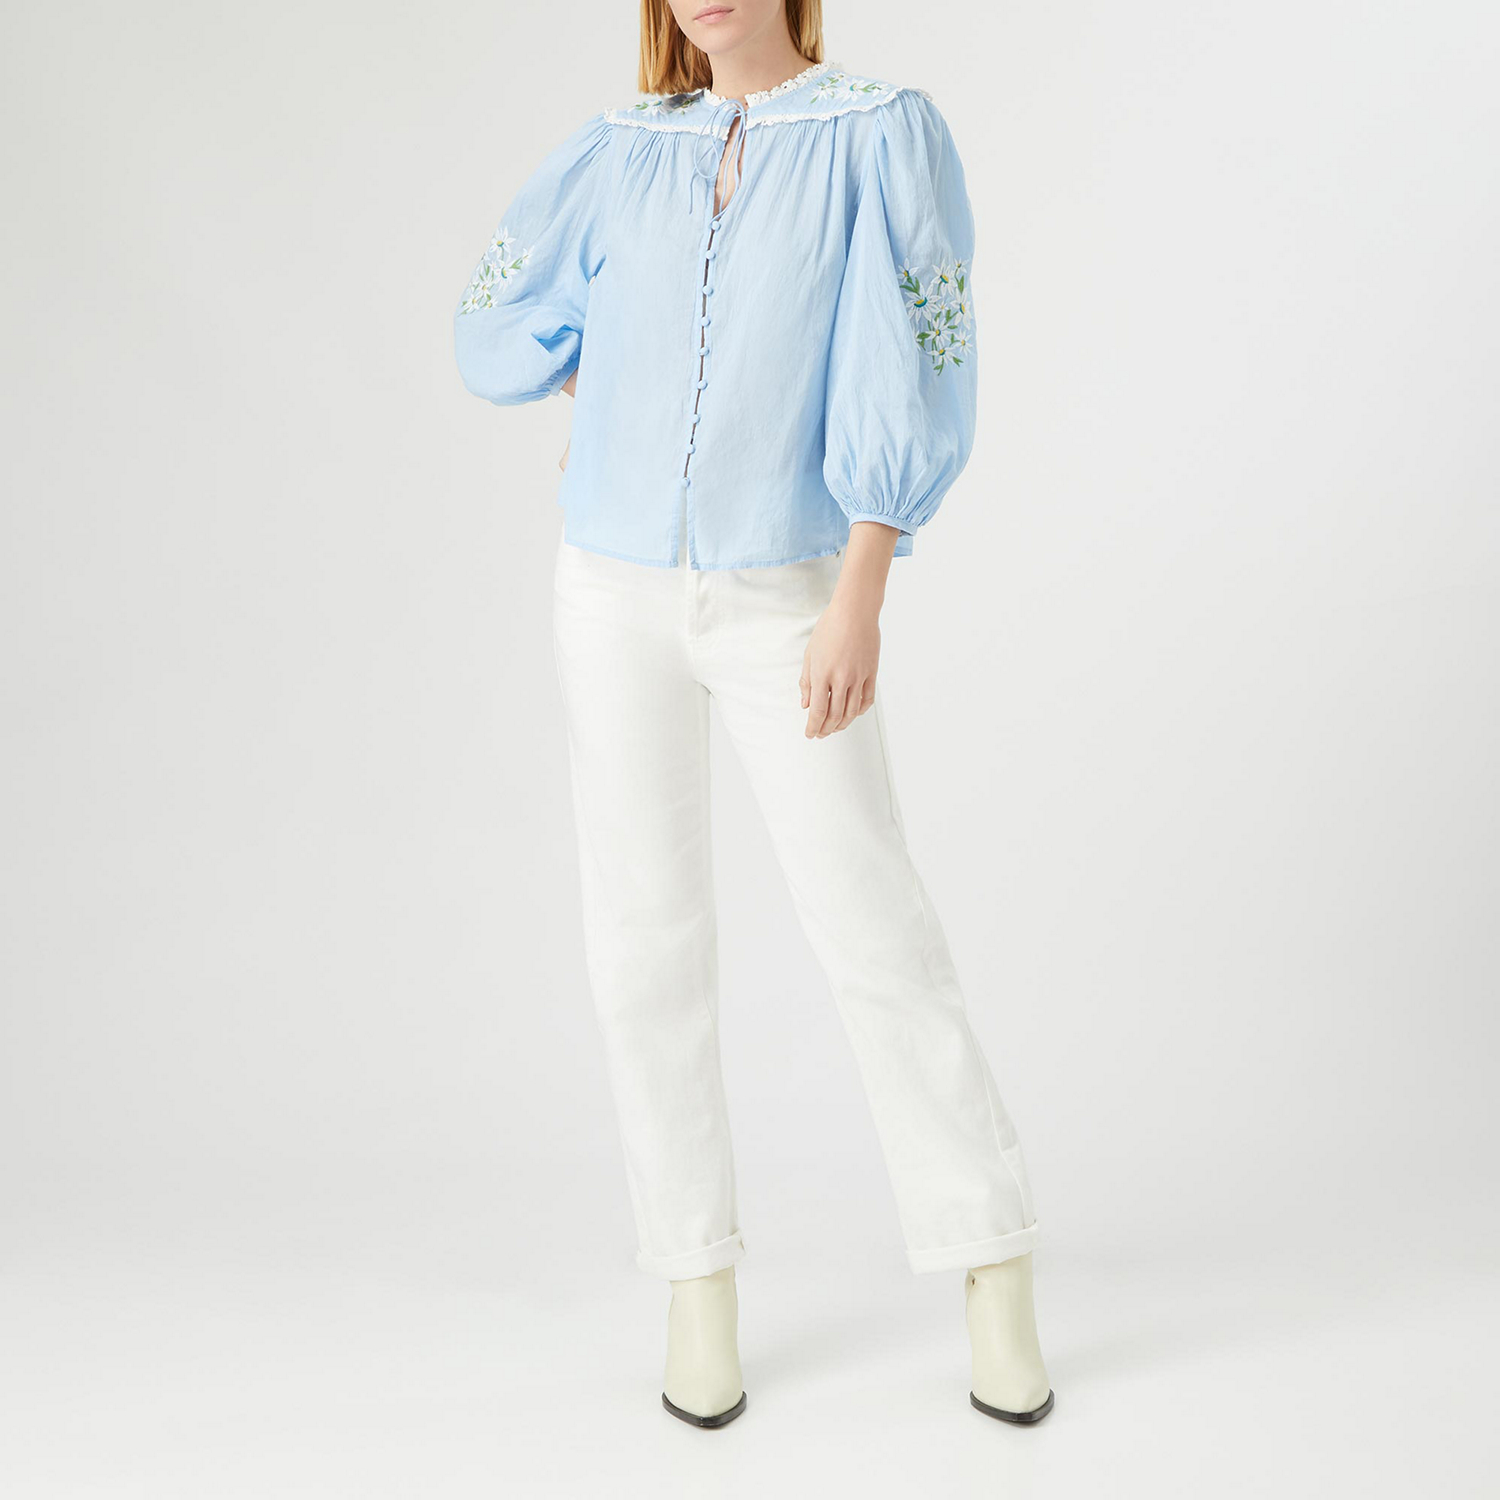 Ren Floral Embroidered Blouse